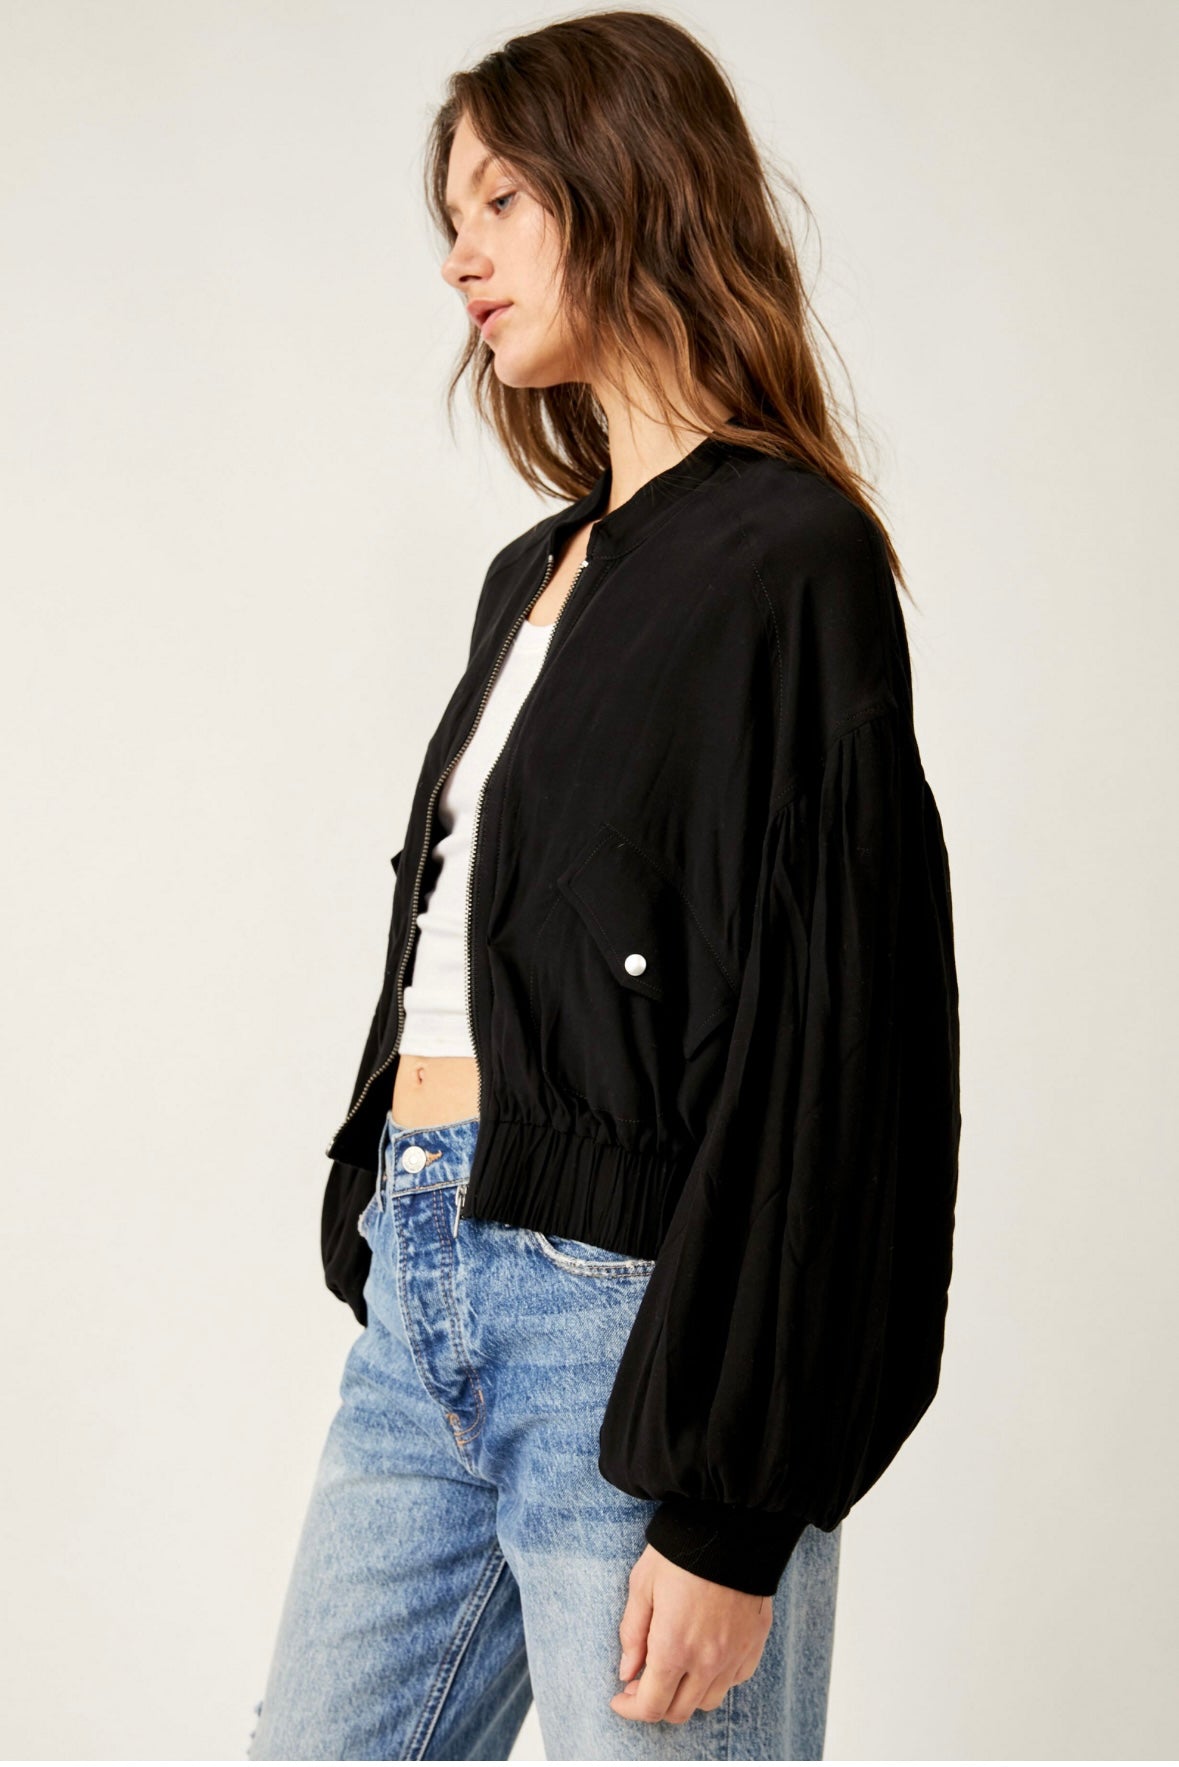 Free People On Pointe Bomber